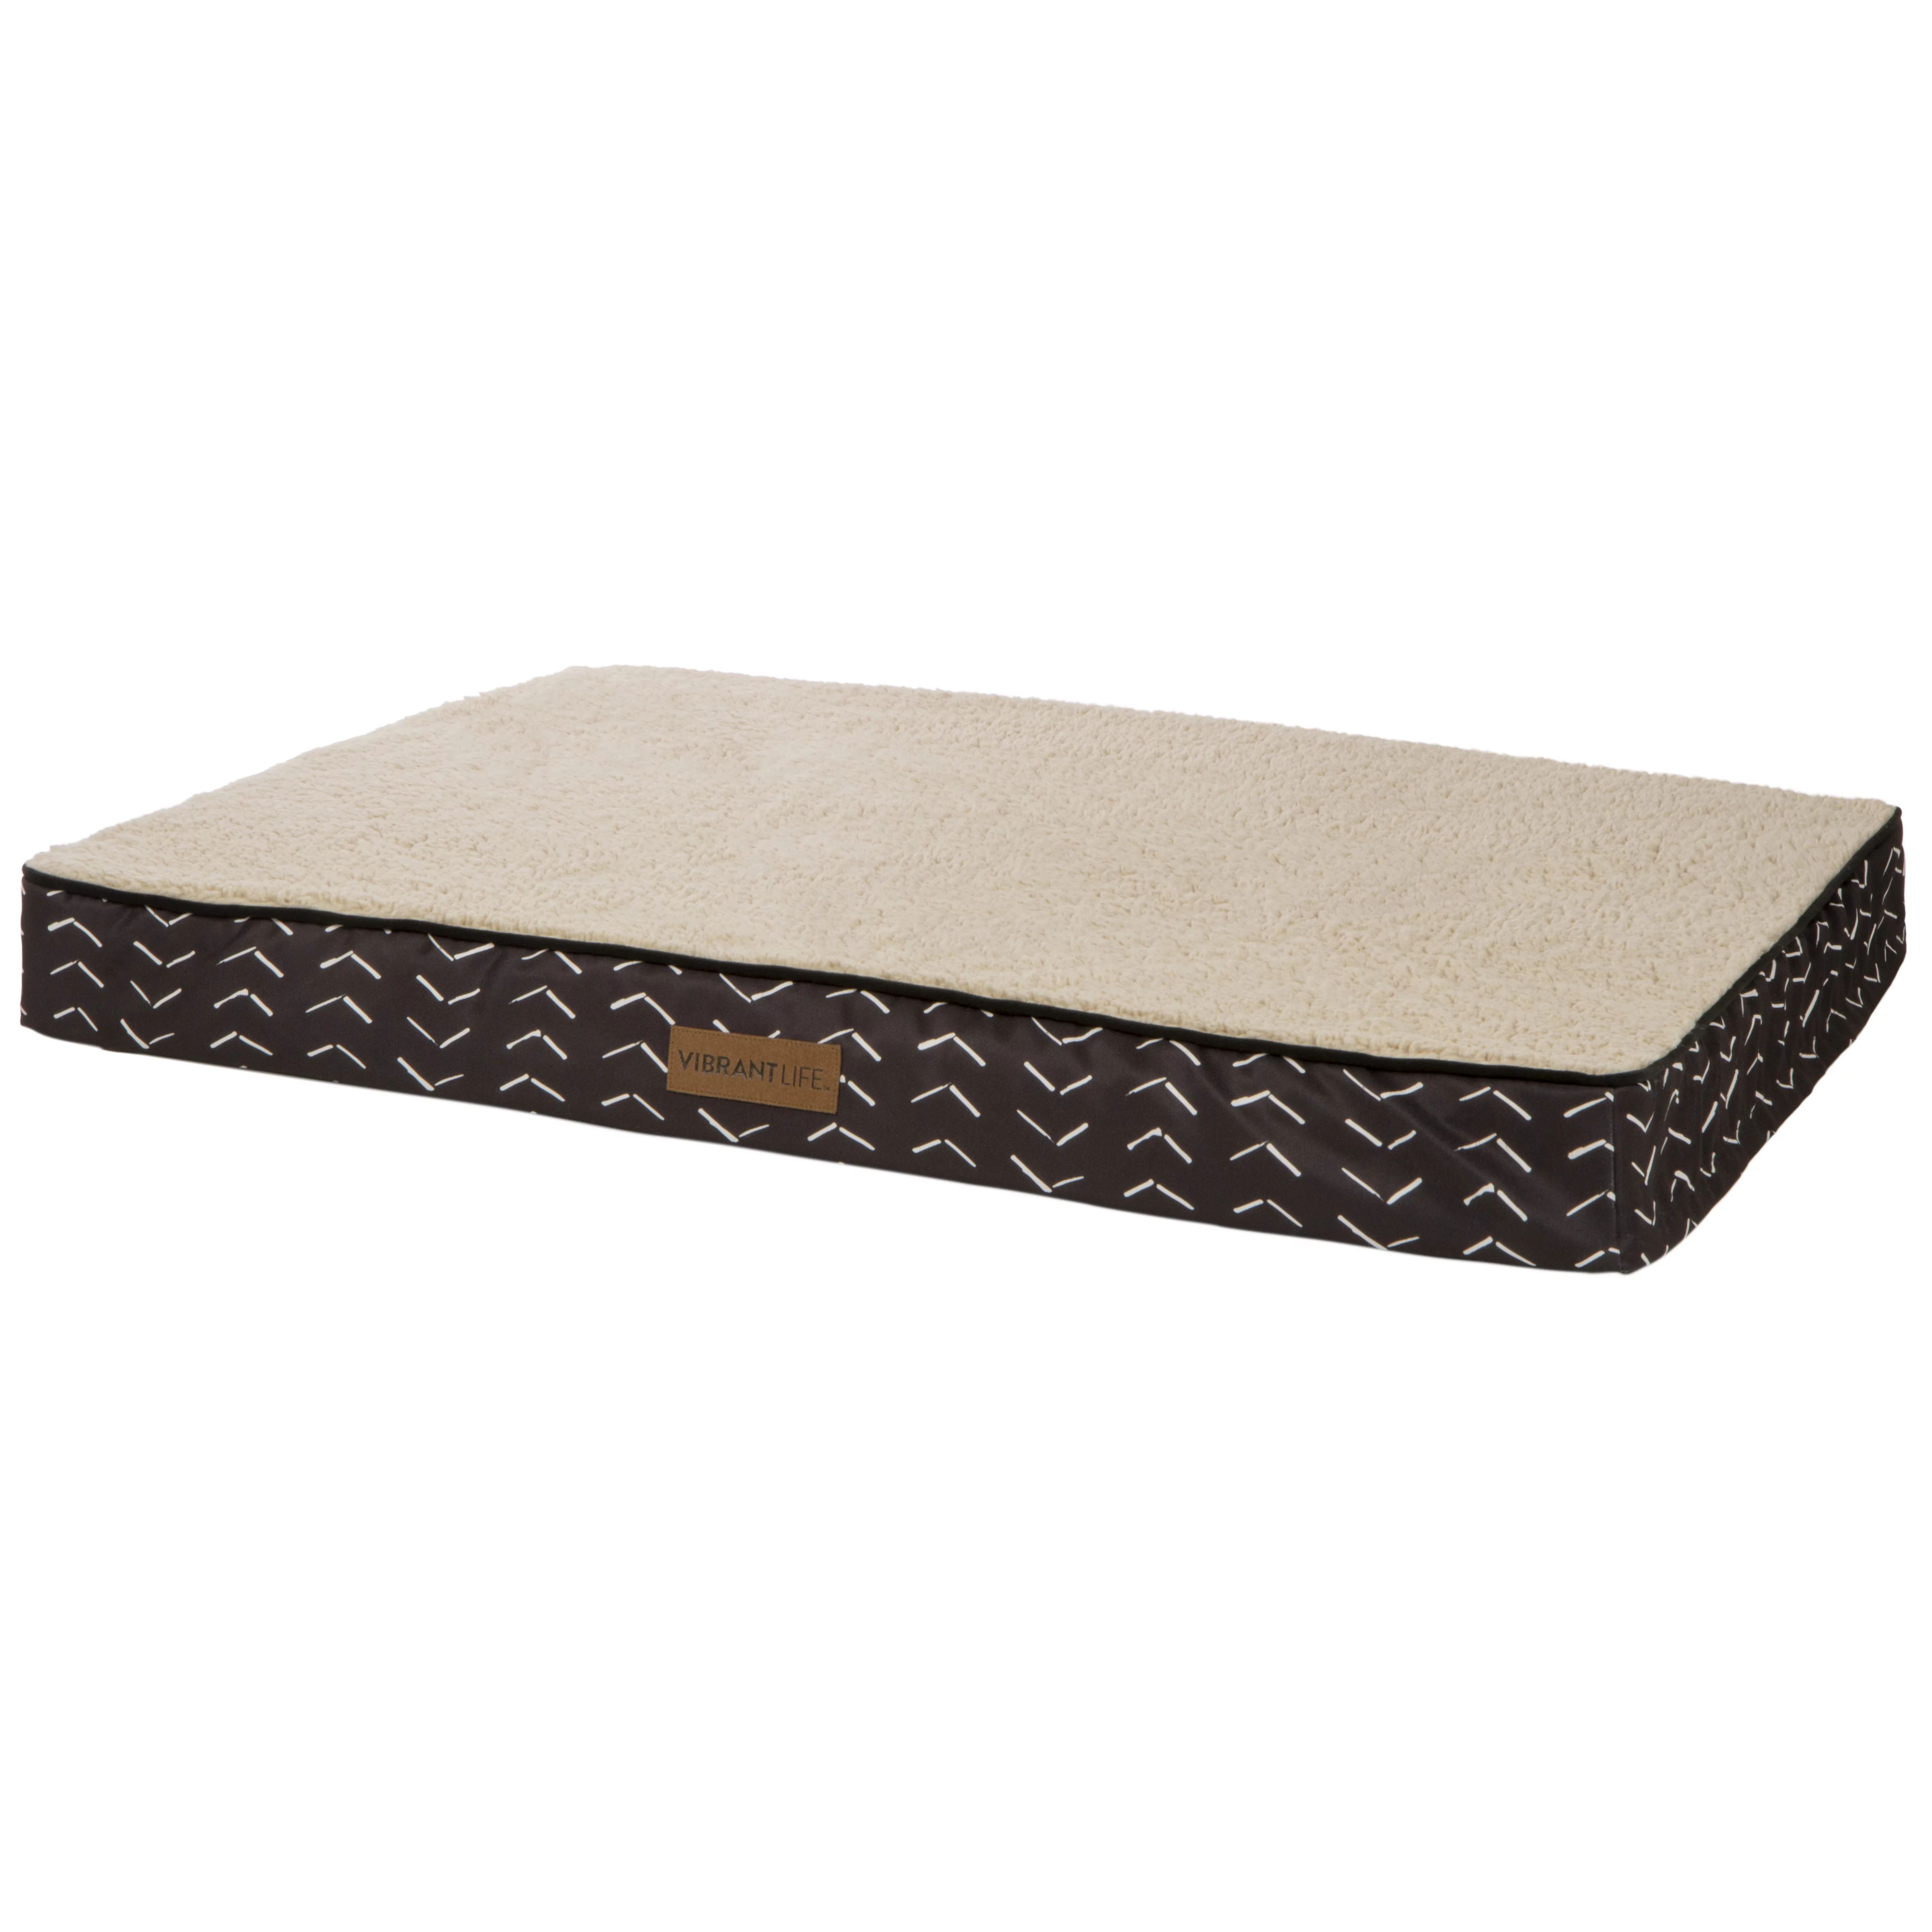 Vibrant Life Orthopedic Bed Mattress Edition Dog Bed, Large, 40"x30", Up to 70lbs | Walmart (US)